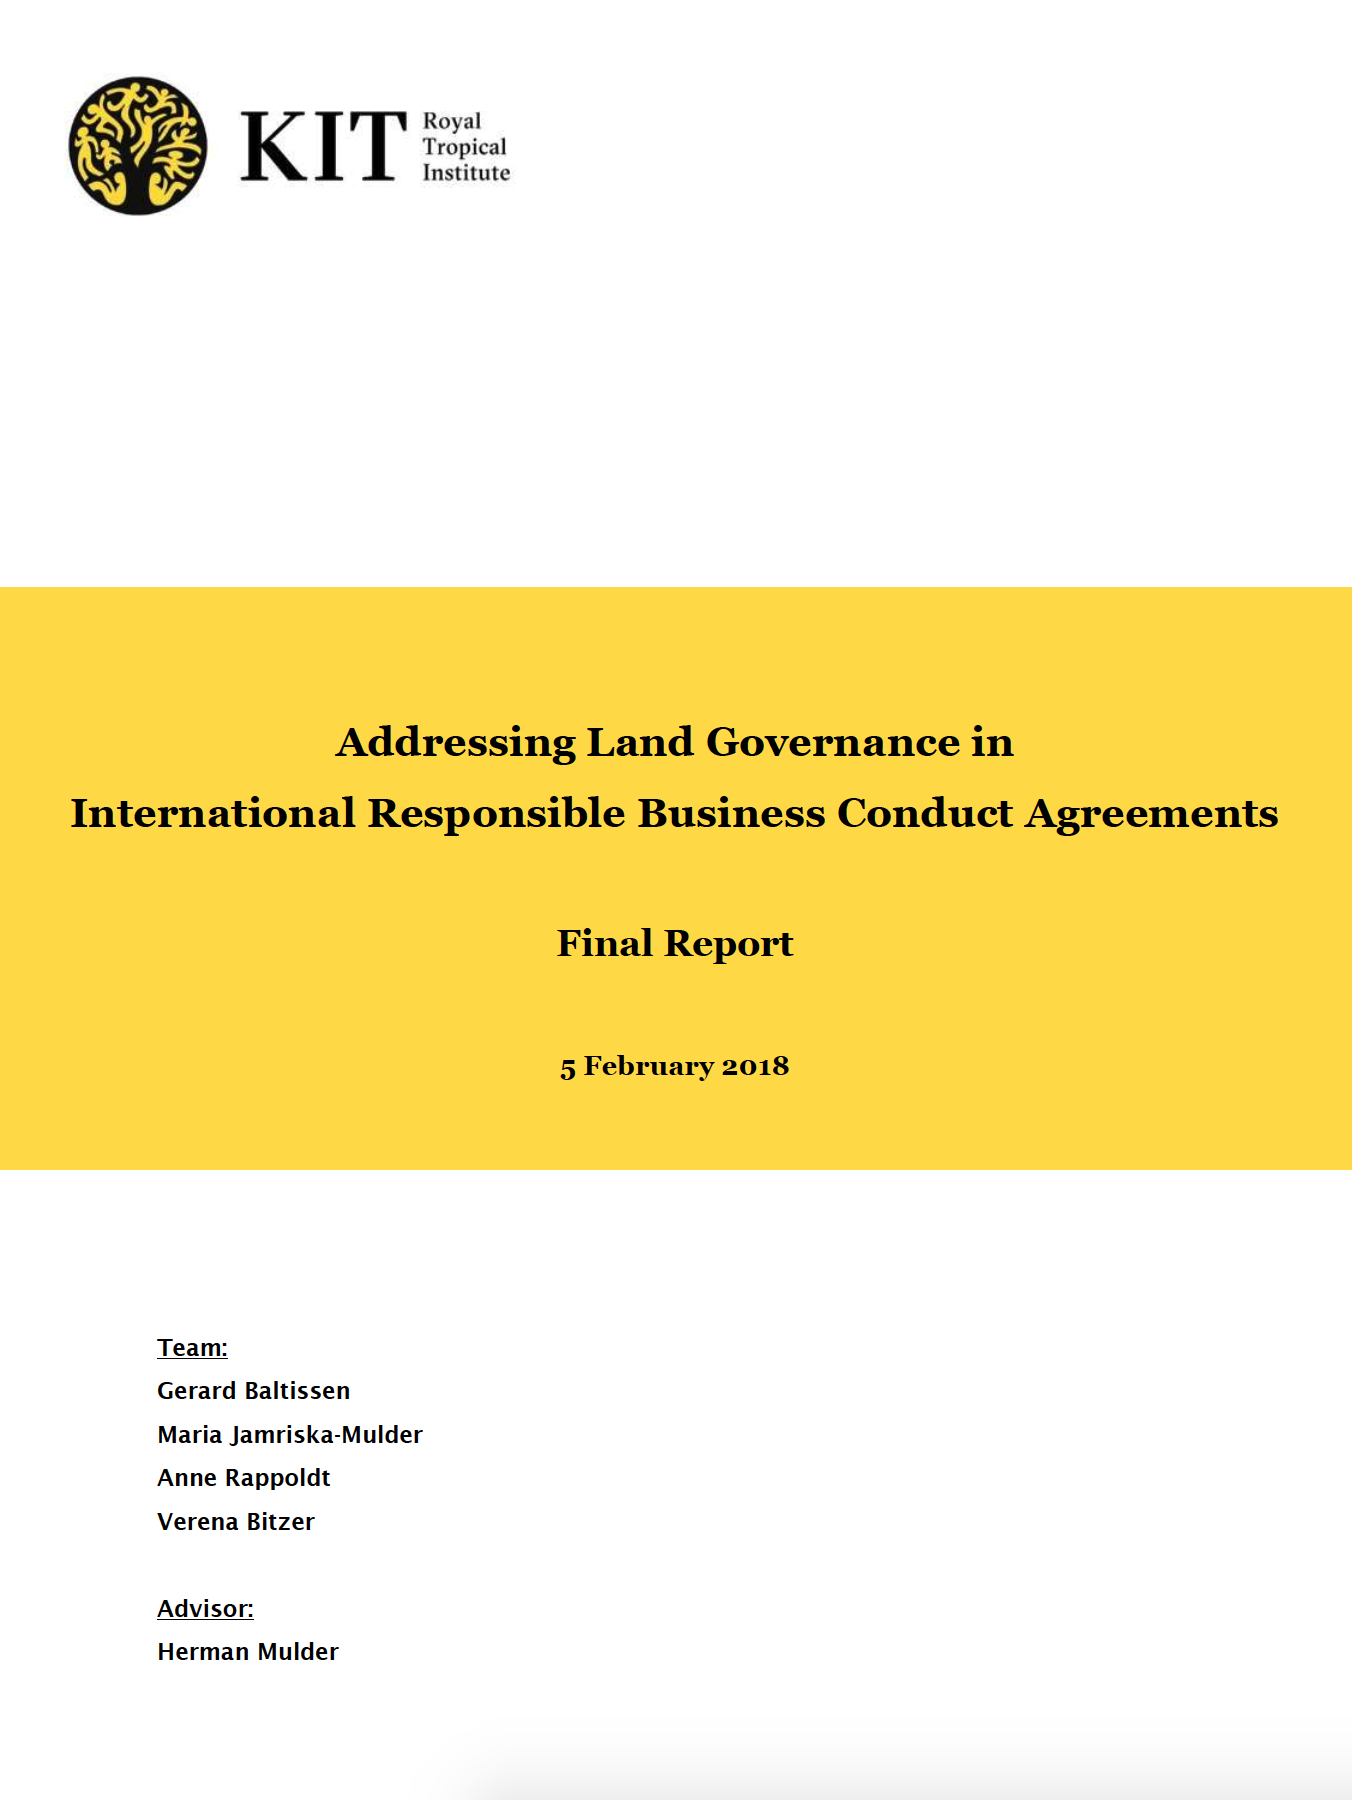 Addressing Land Governance in International Responsible Business Conduct Agreements cover image